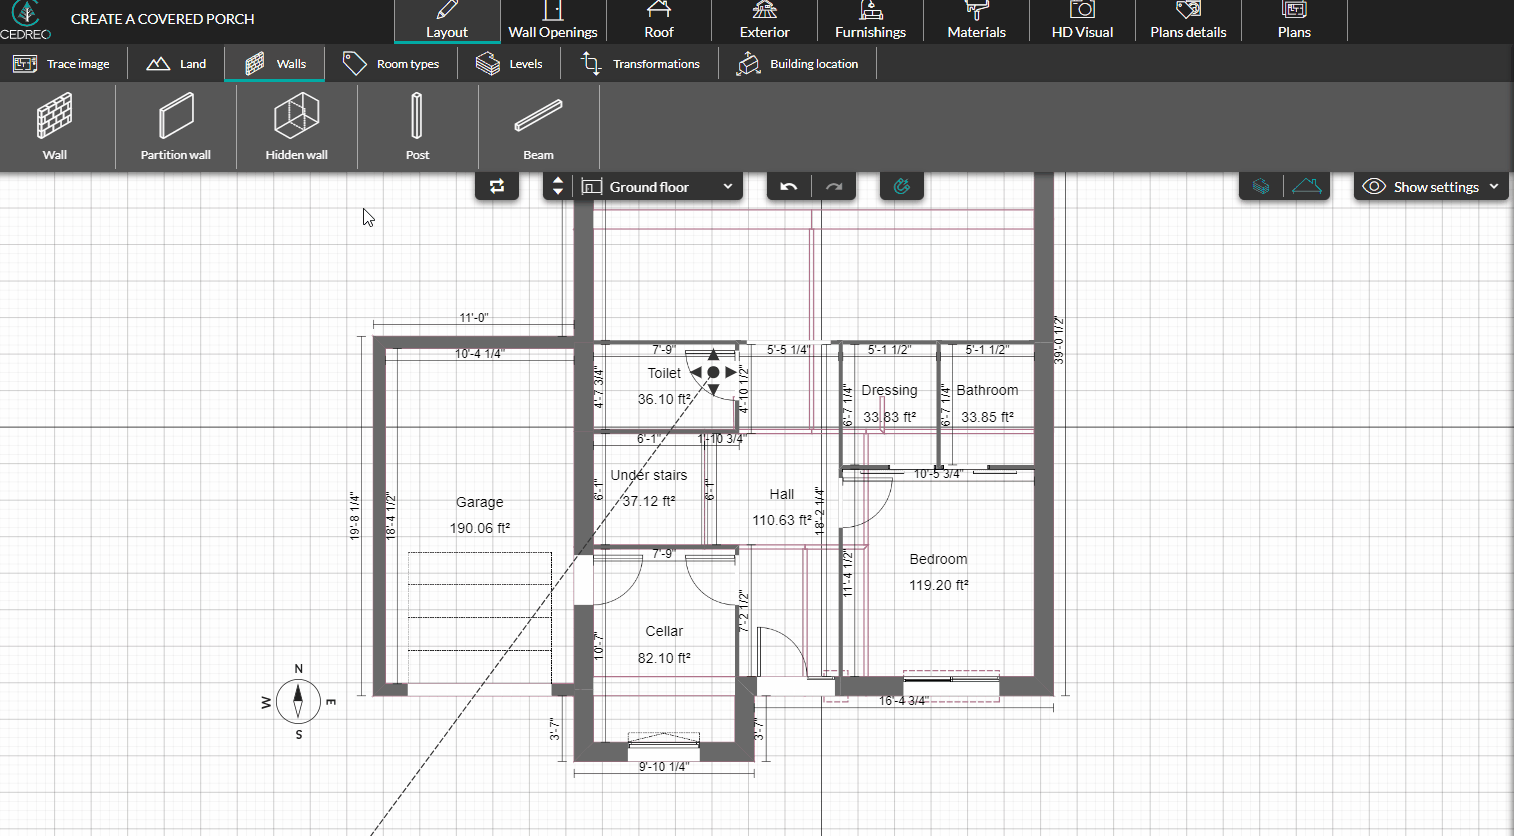 Hidden walls and room types for porch